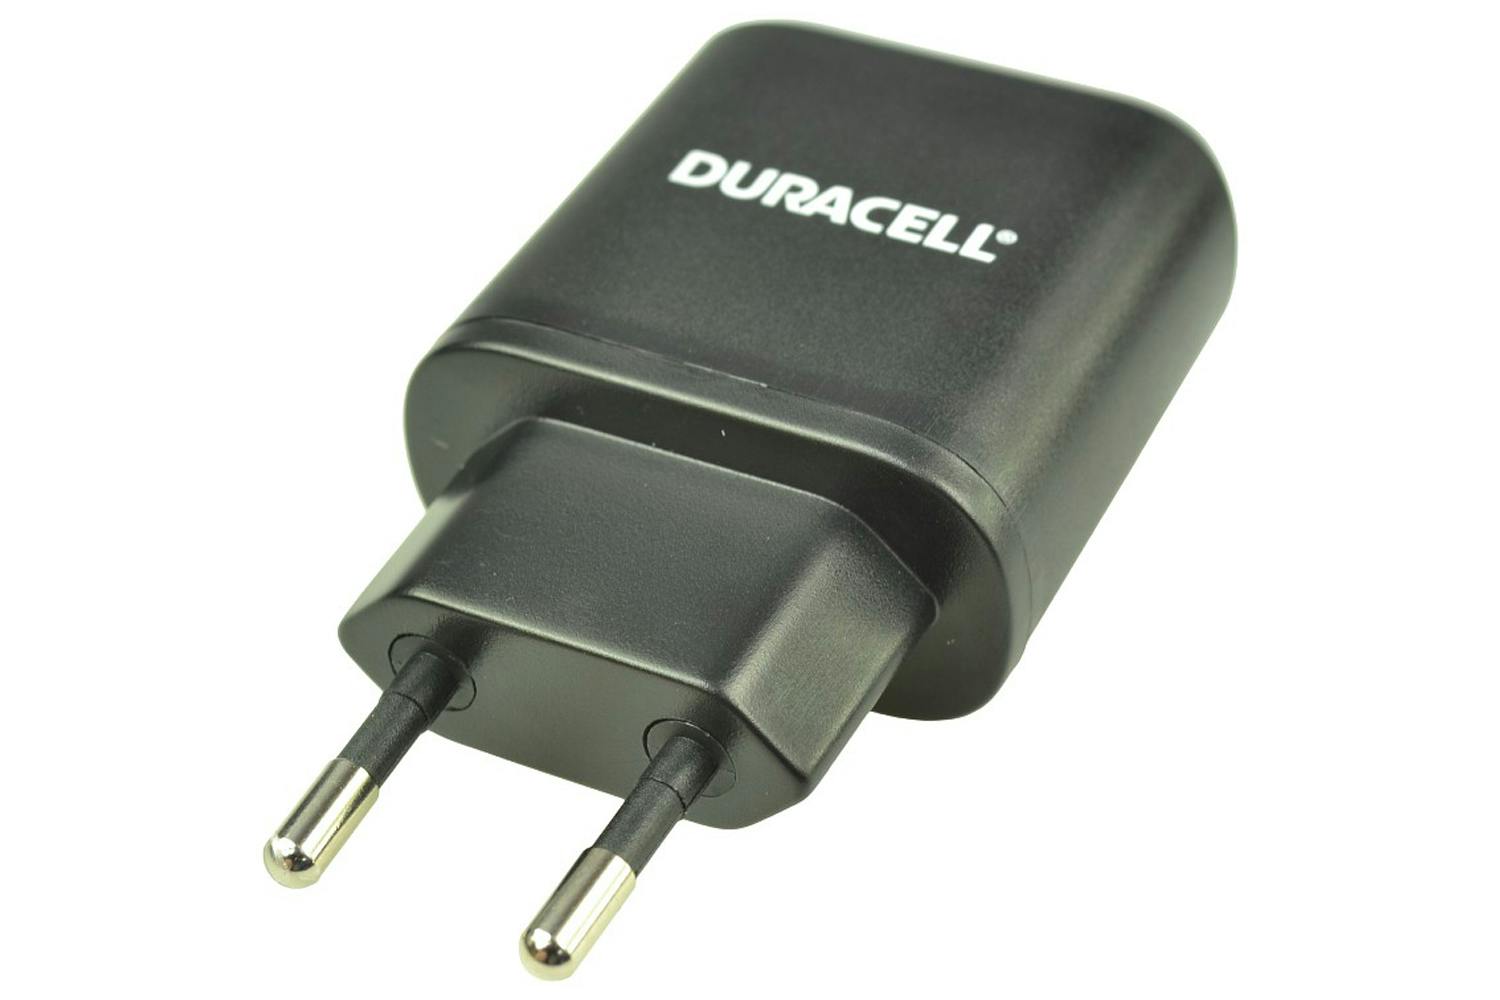 Duracell Duracell Type-C&Type-A Mains Charger